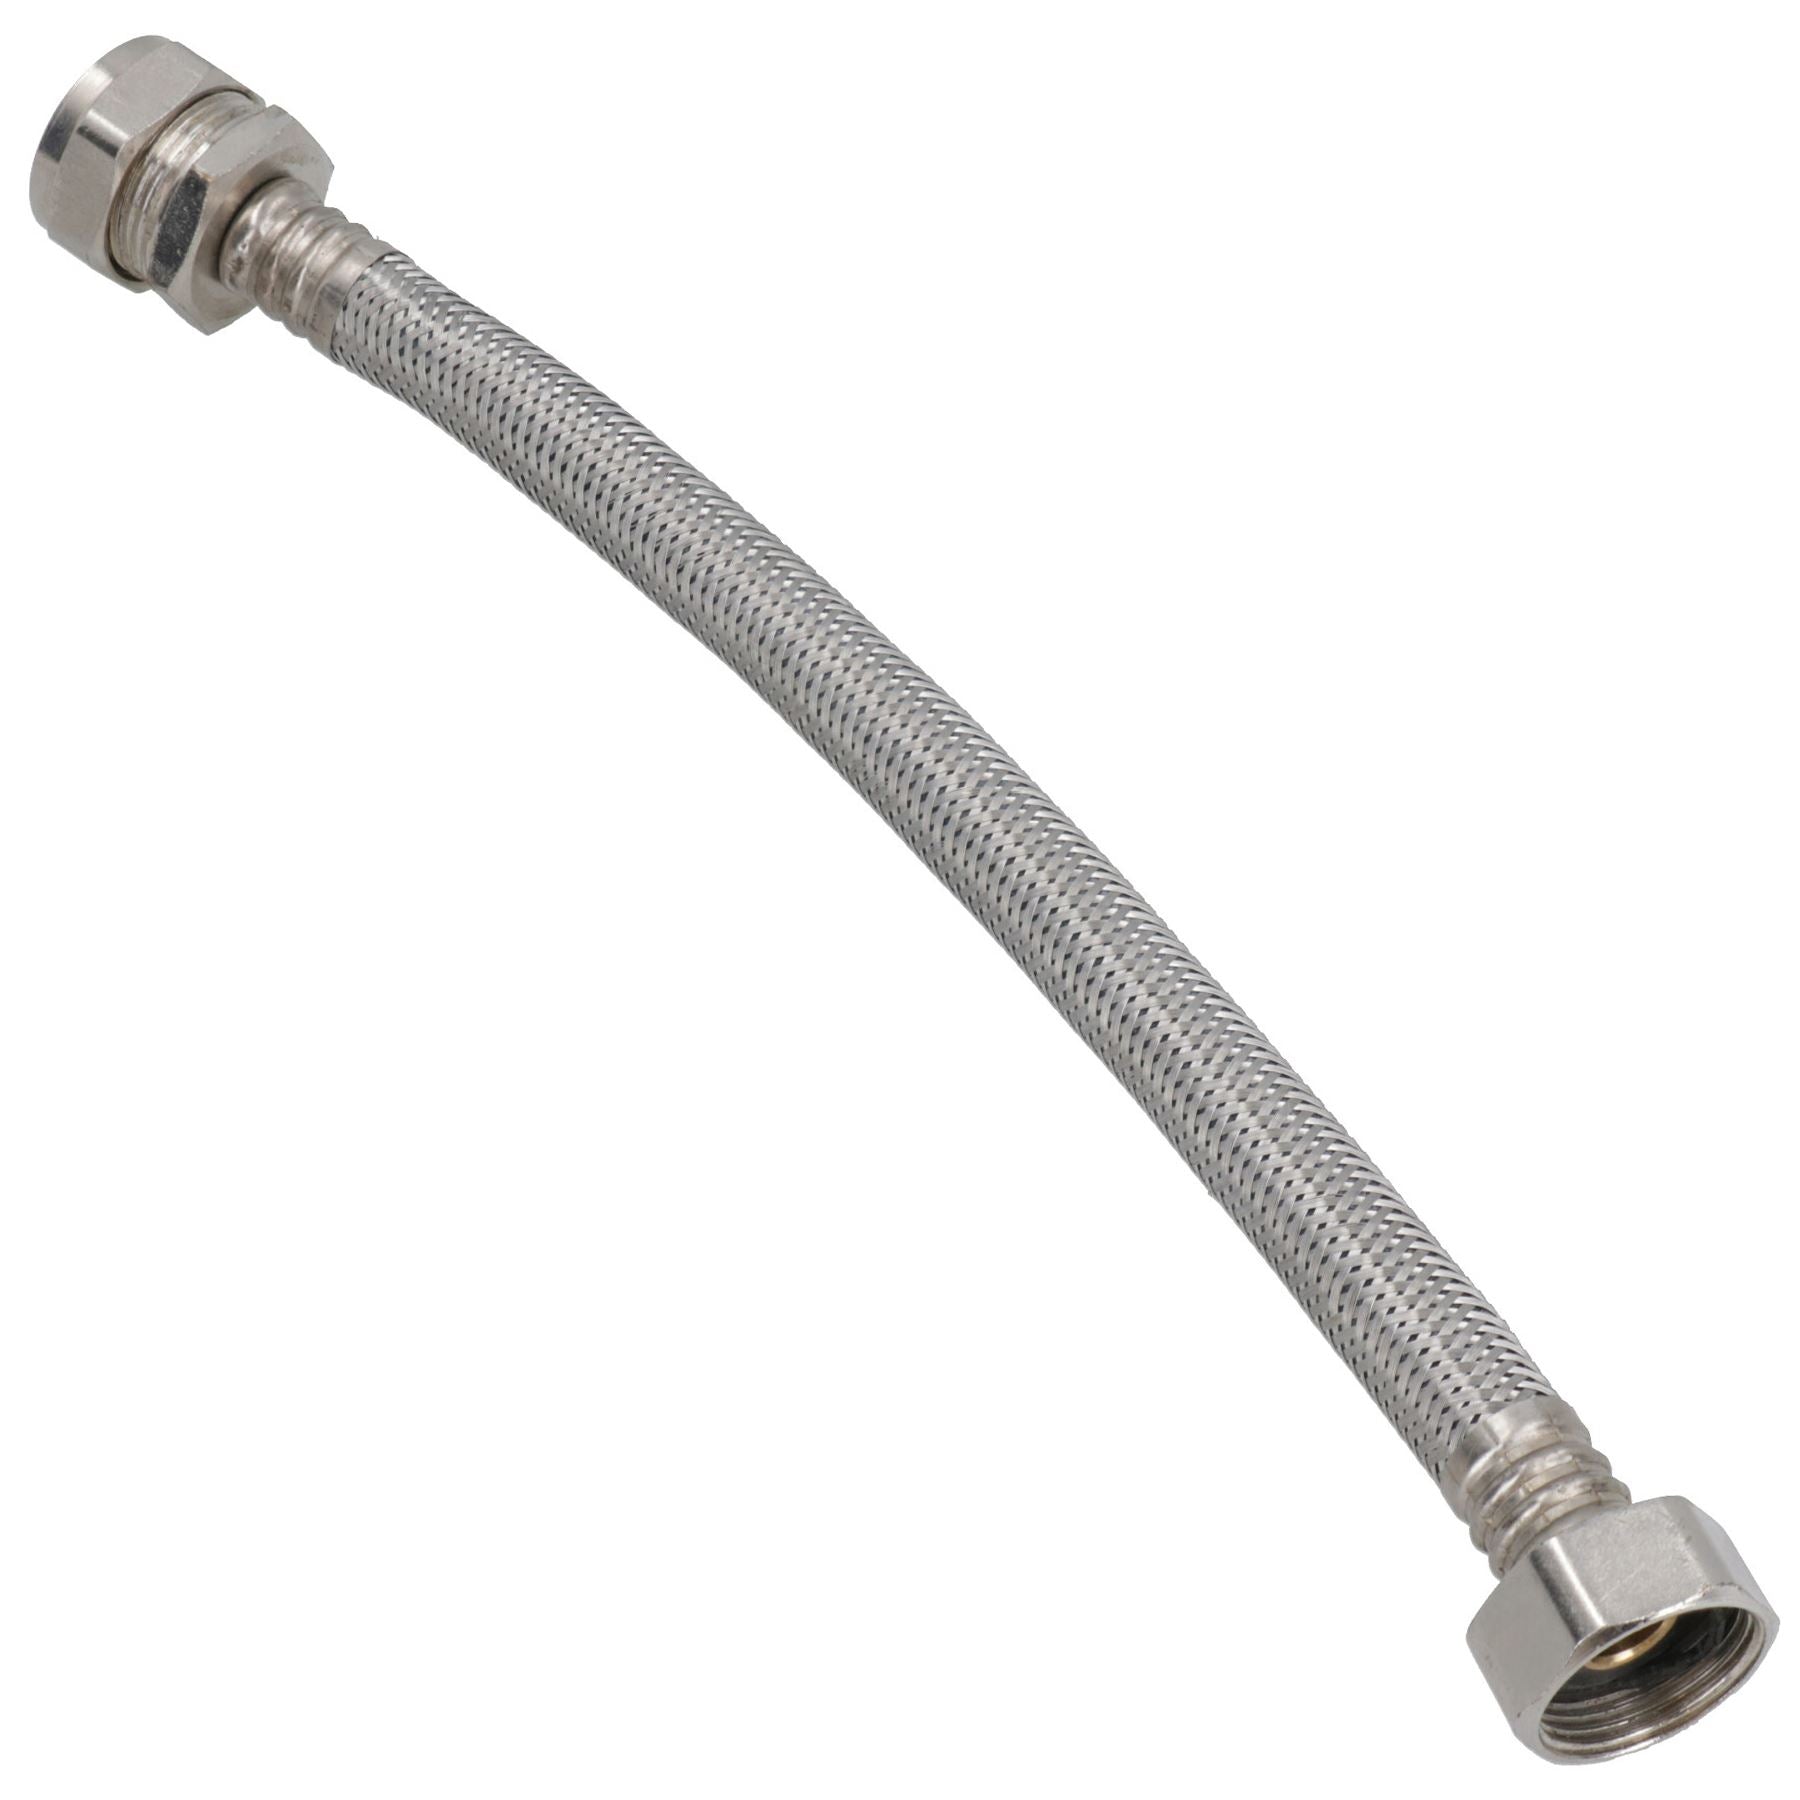 Flexible Compression Tap Connector 22mm x 3/4in 300mm Braided Stainless Steel